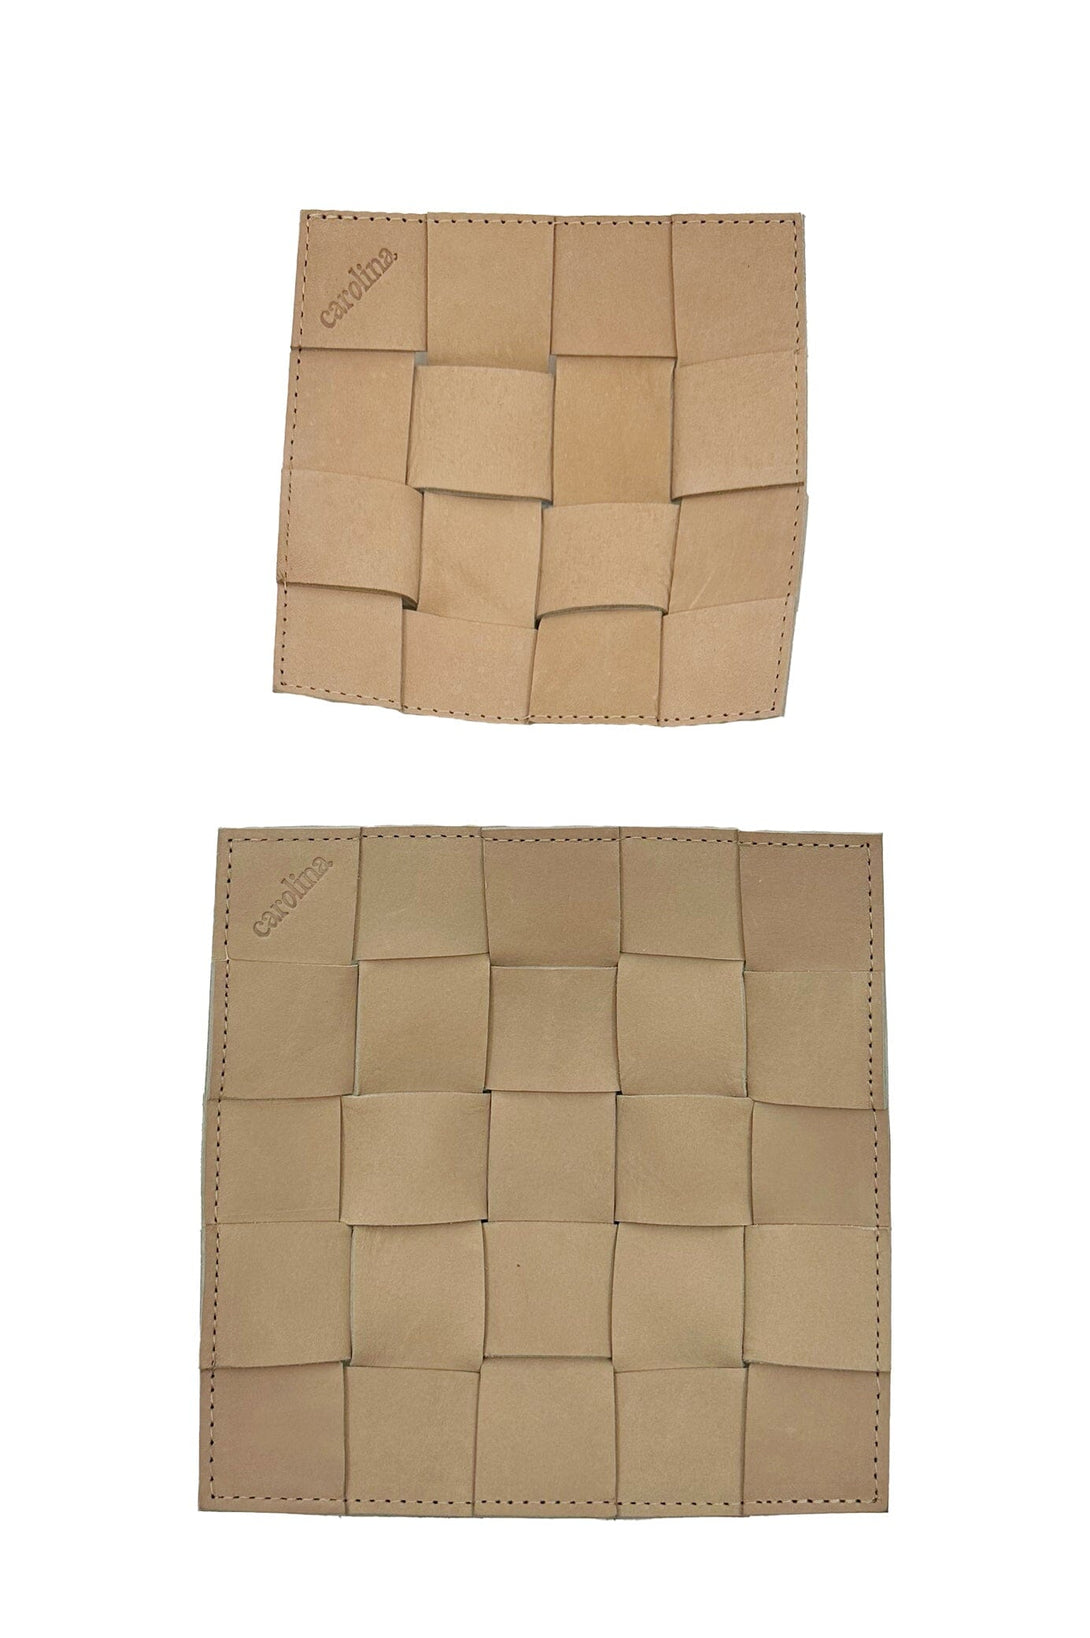 Plaited Leather Trays Pack of 2 Leather